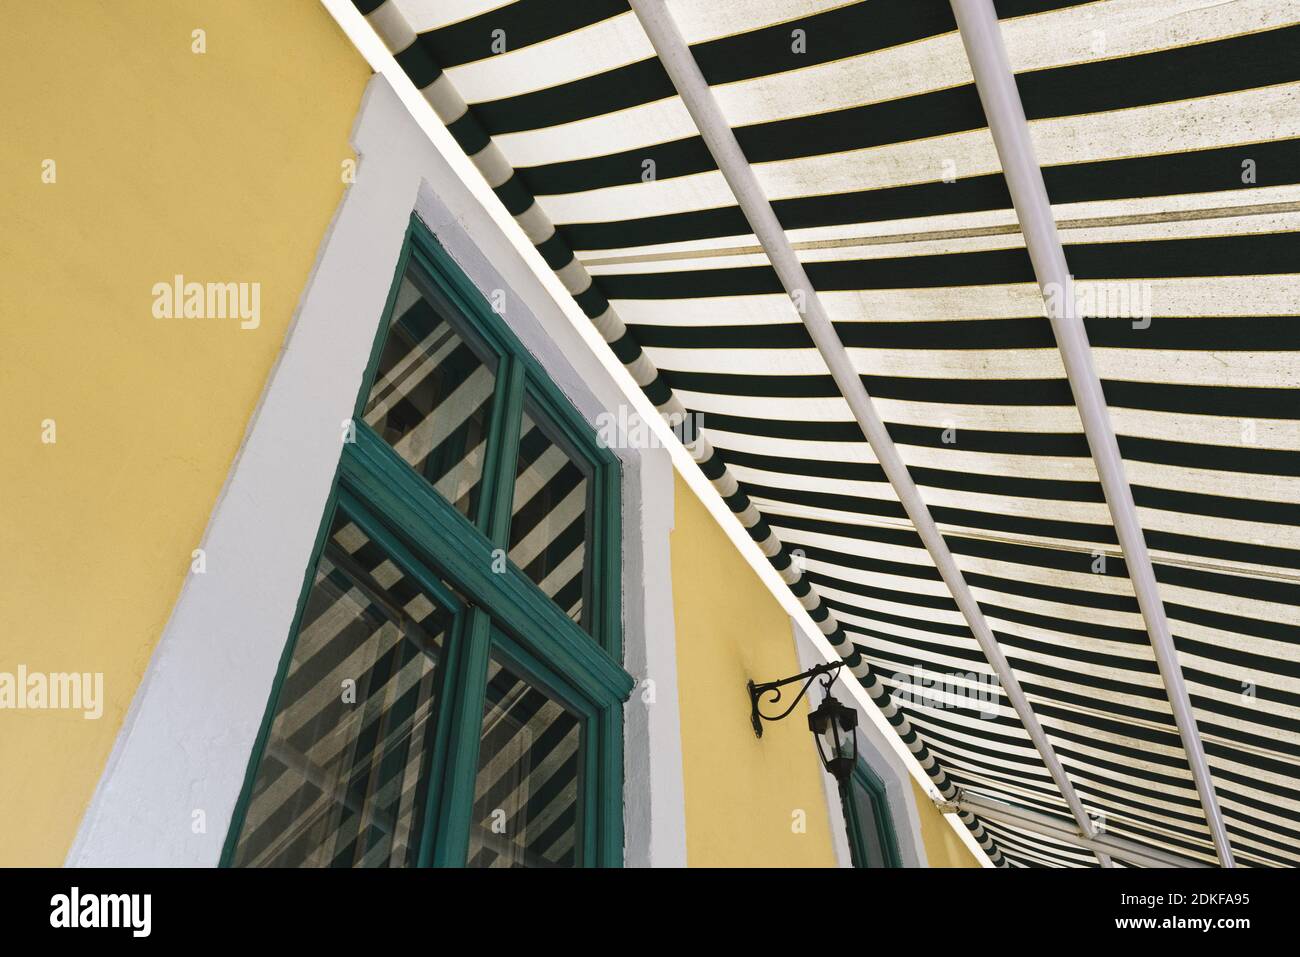 Architectural geometric abstraction with window and striped awning Stock Photo